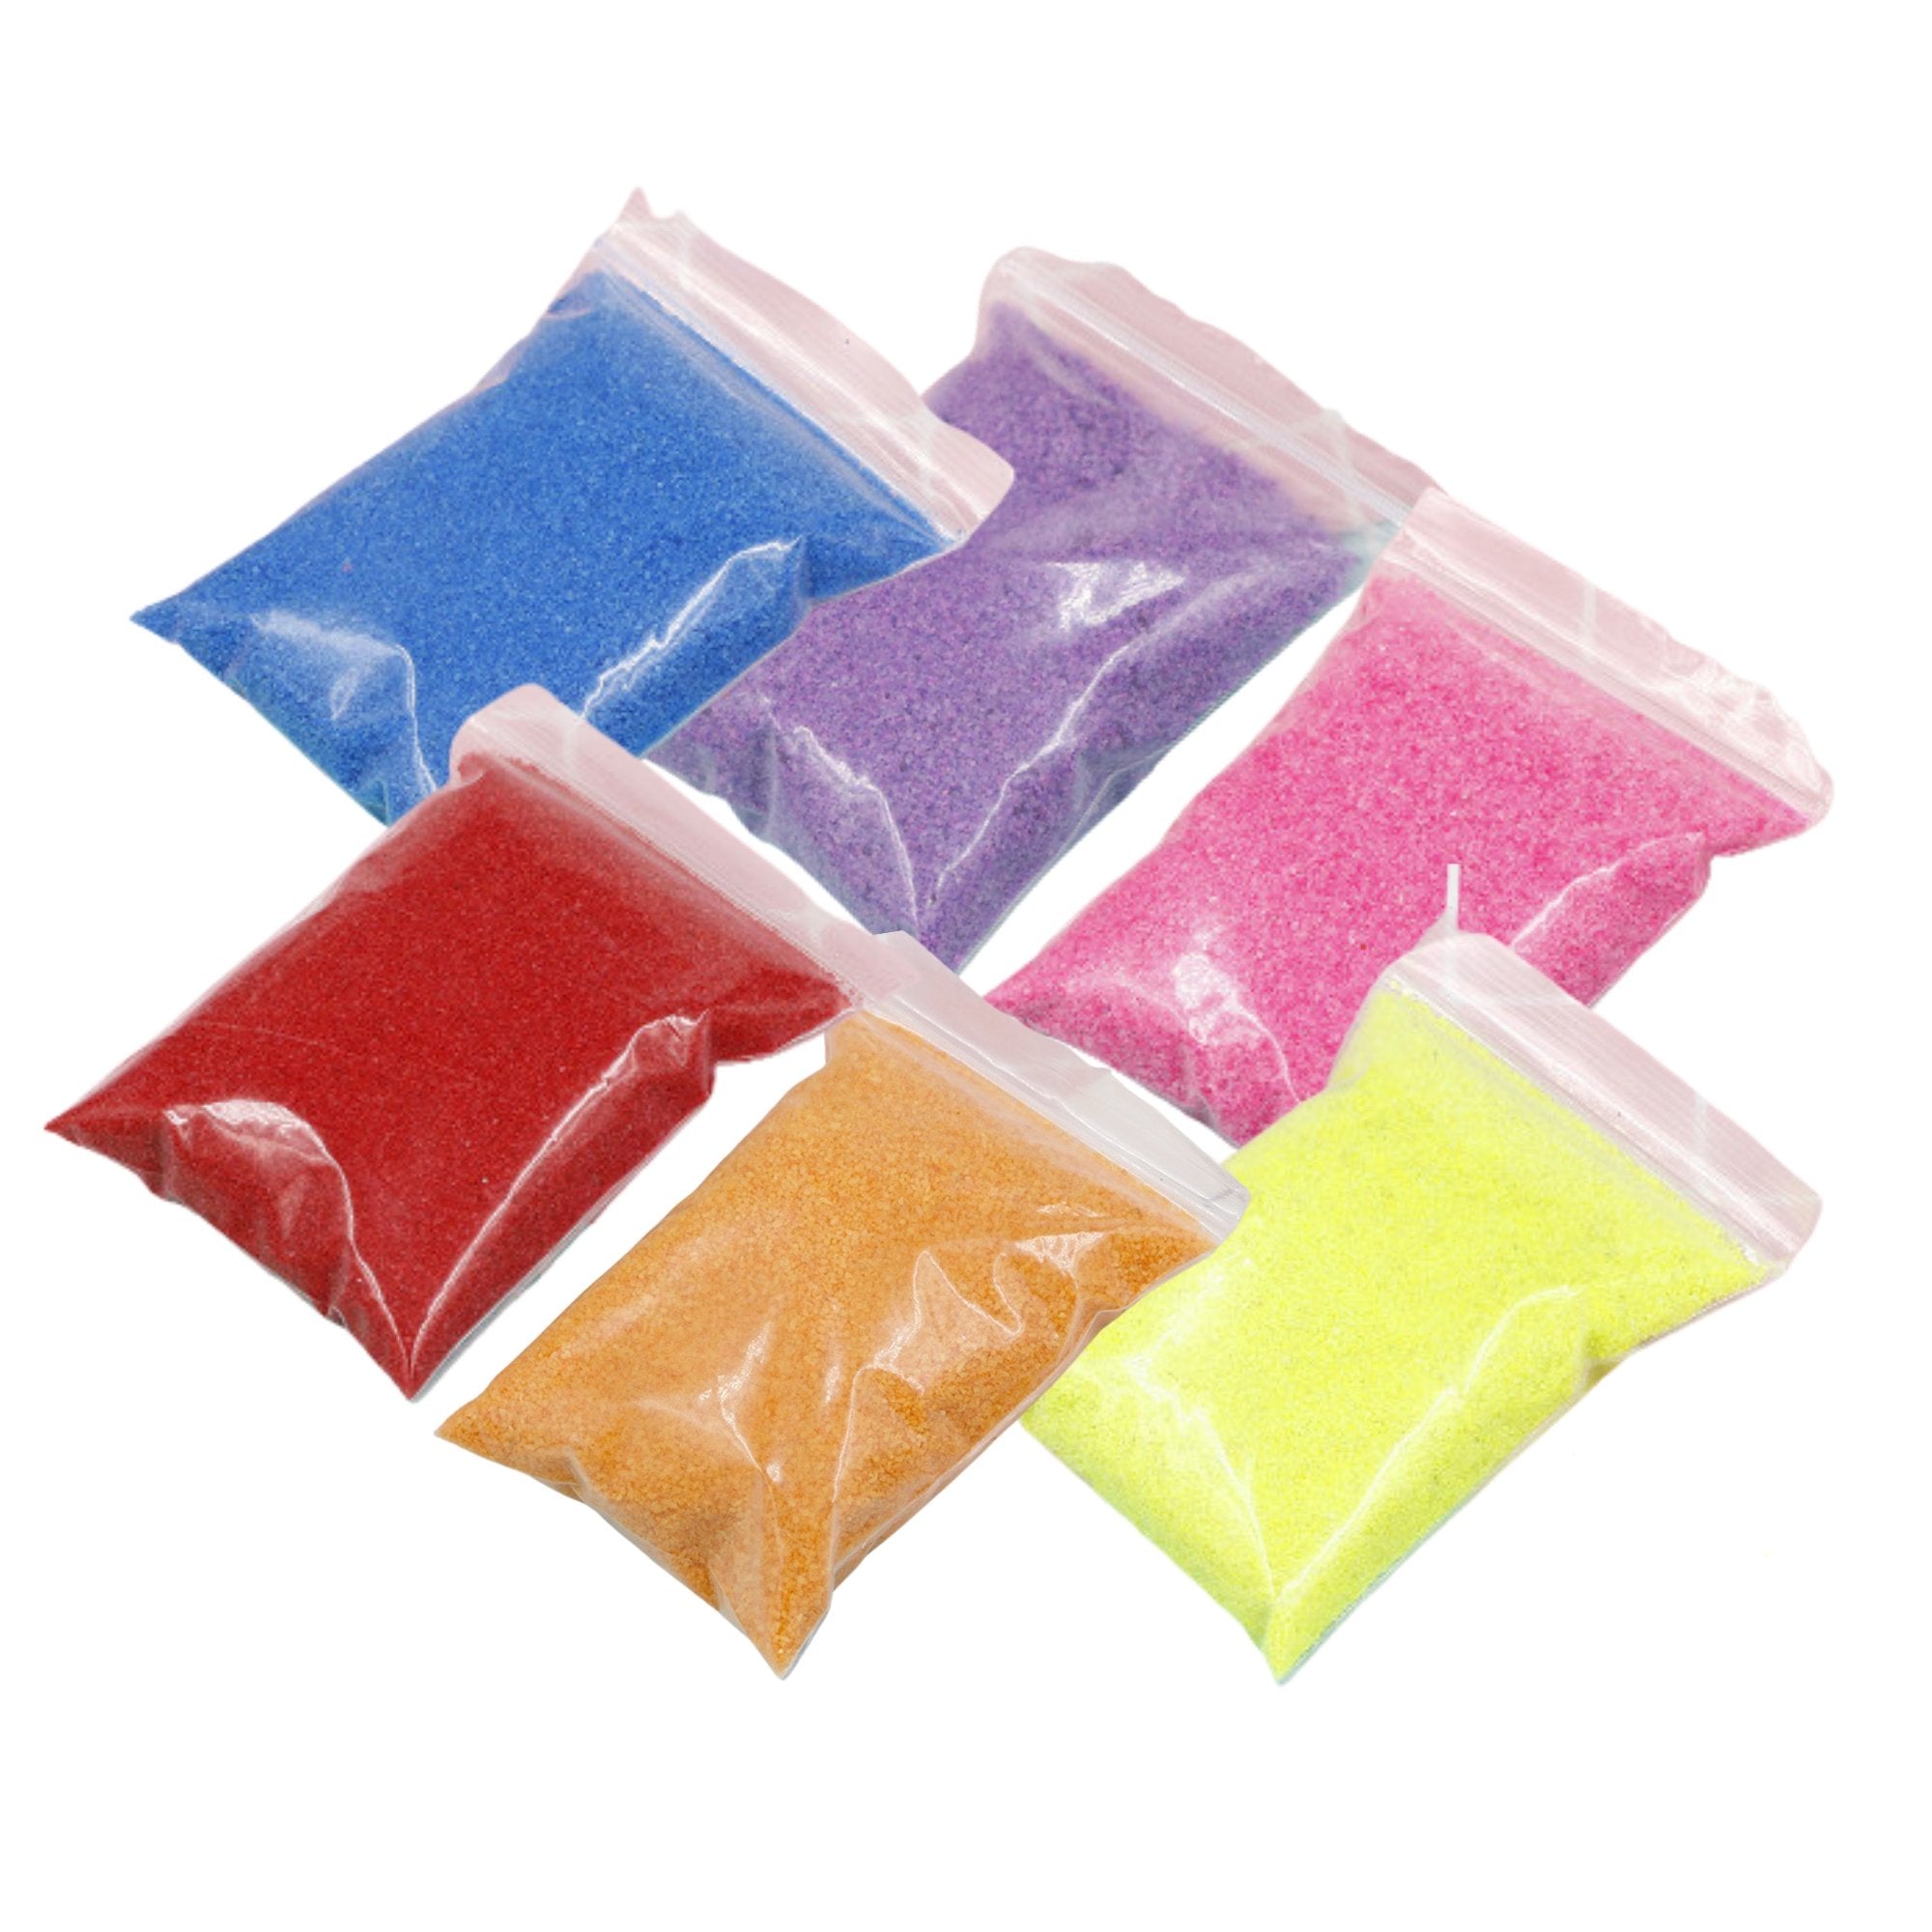 Colorful Magic Sand all color package